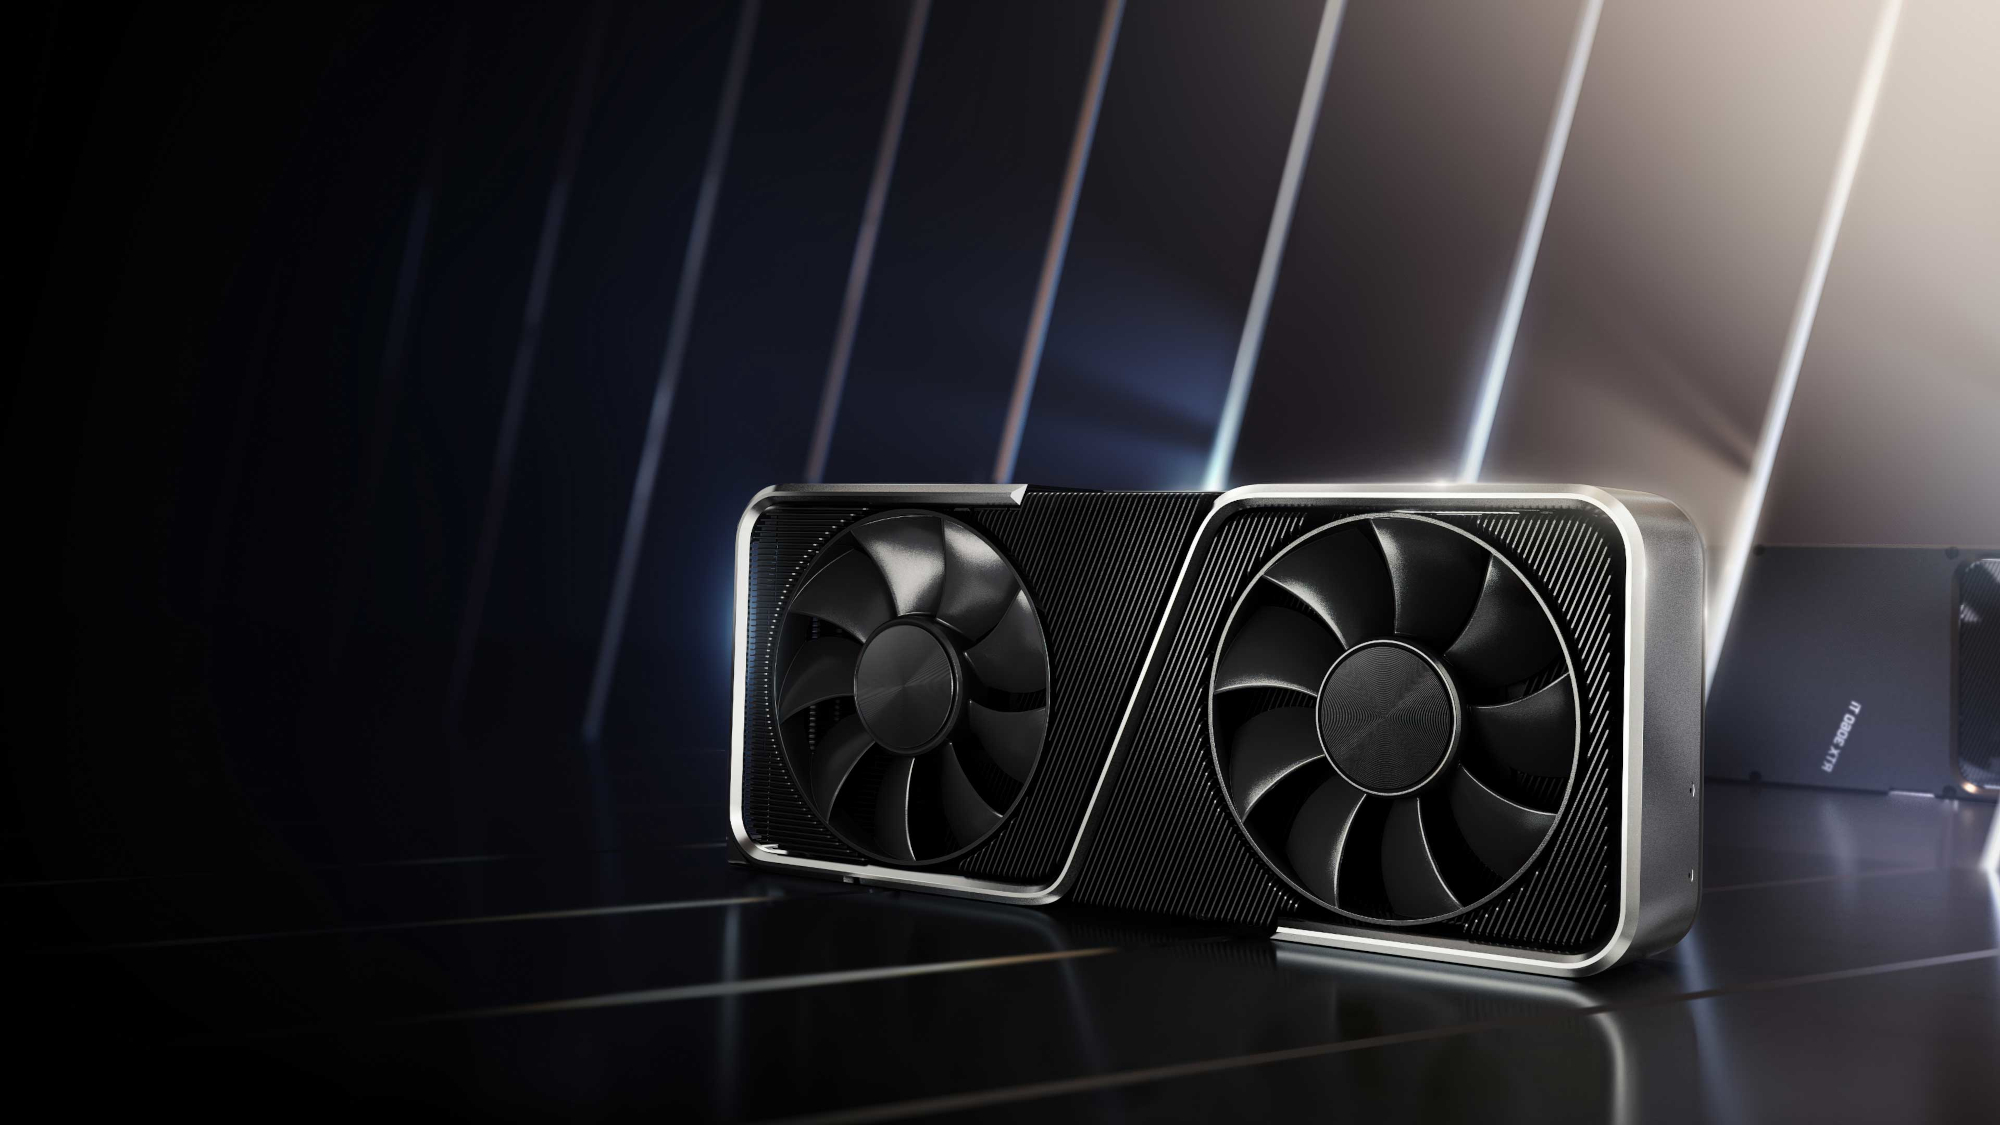 Nvidia GeForce RTX 3050 price, restocks, specs, performance and more